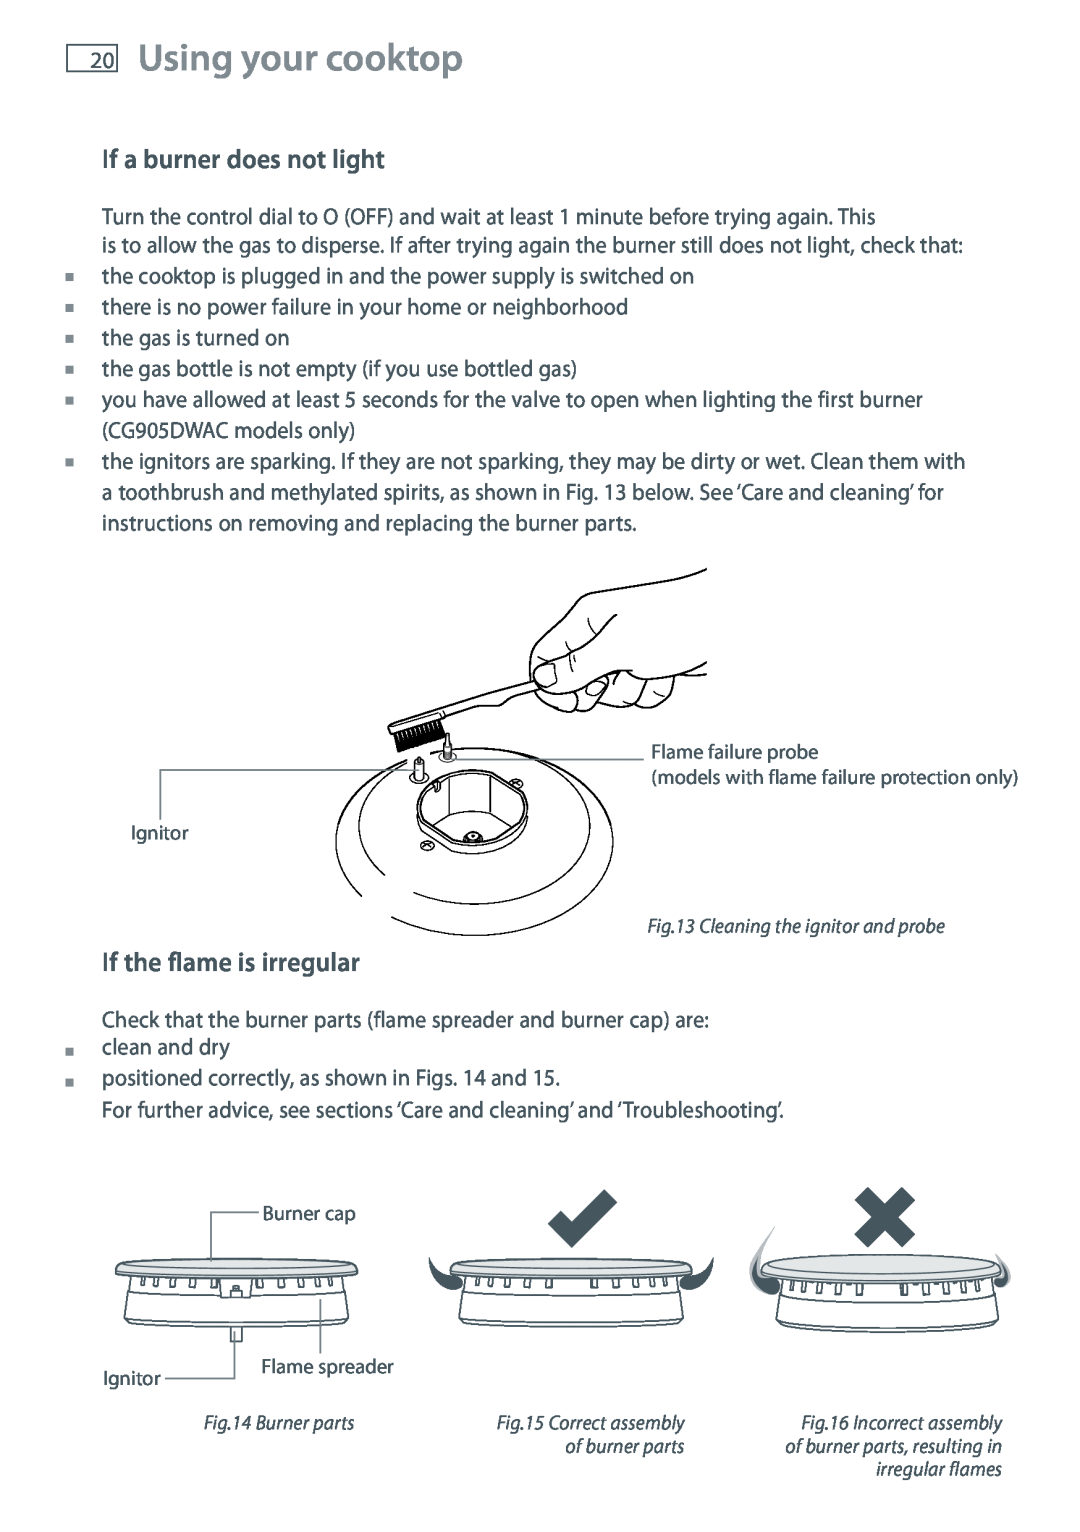 Fisher & Paykel CG905 installation instructions If a burner does not light, If the flame is irregular, Using your cooktop 